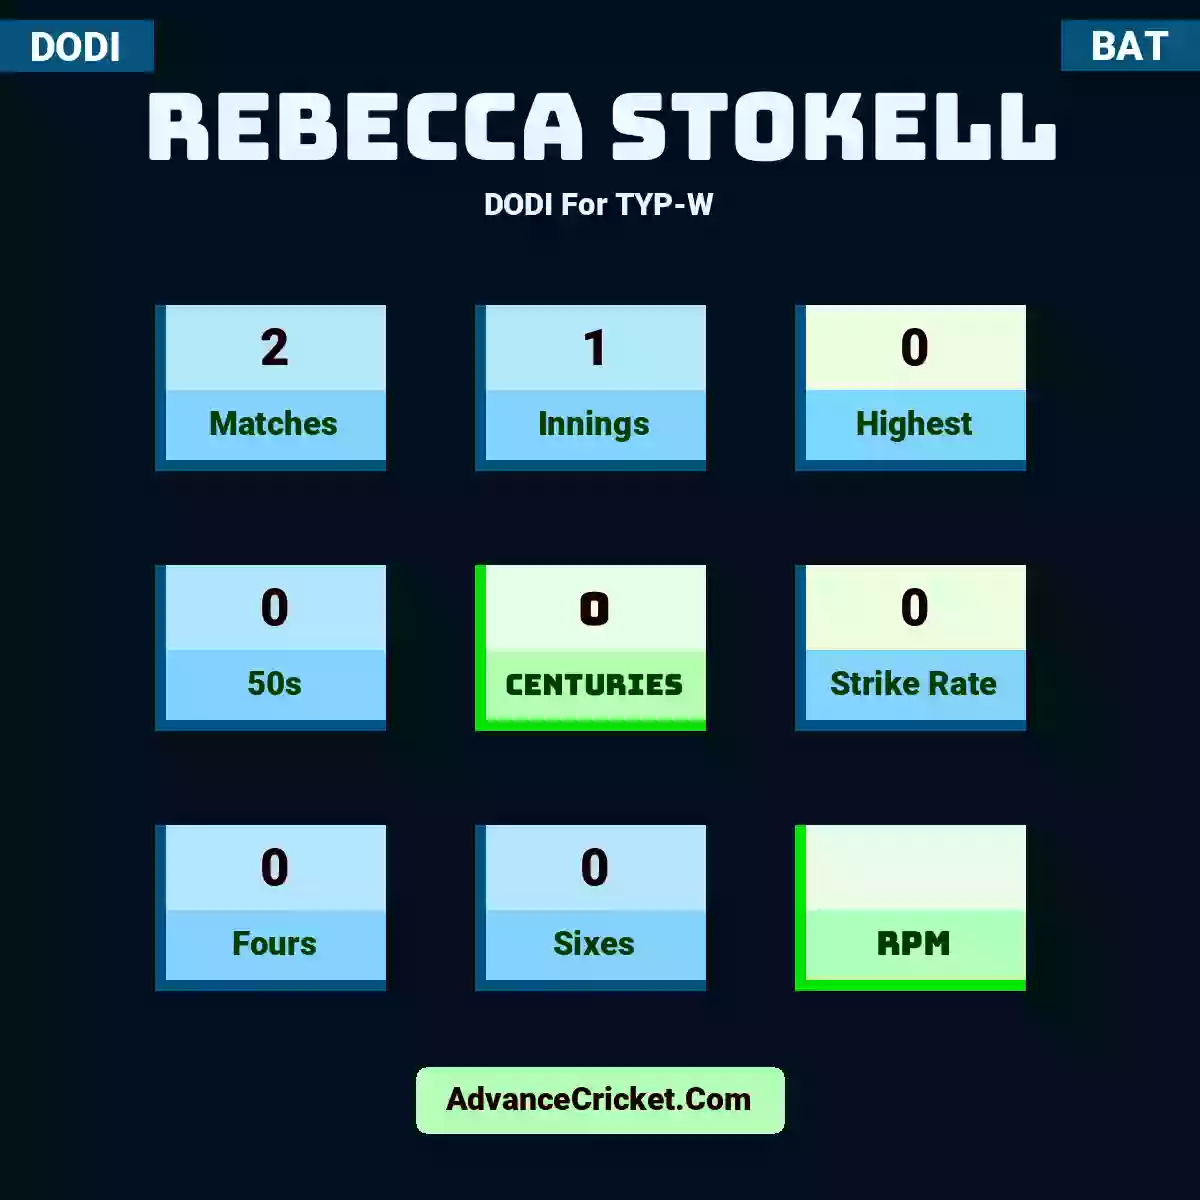 Rebecca Stokell DODI  For TYP-W, Rebecca Stokell played 2 matches, scored 0 runs as highest, 0 half-centuries, and 0 centuries, with a strike rate of 0. R.Stokell hit 0 fours and 0 sixes.